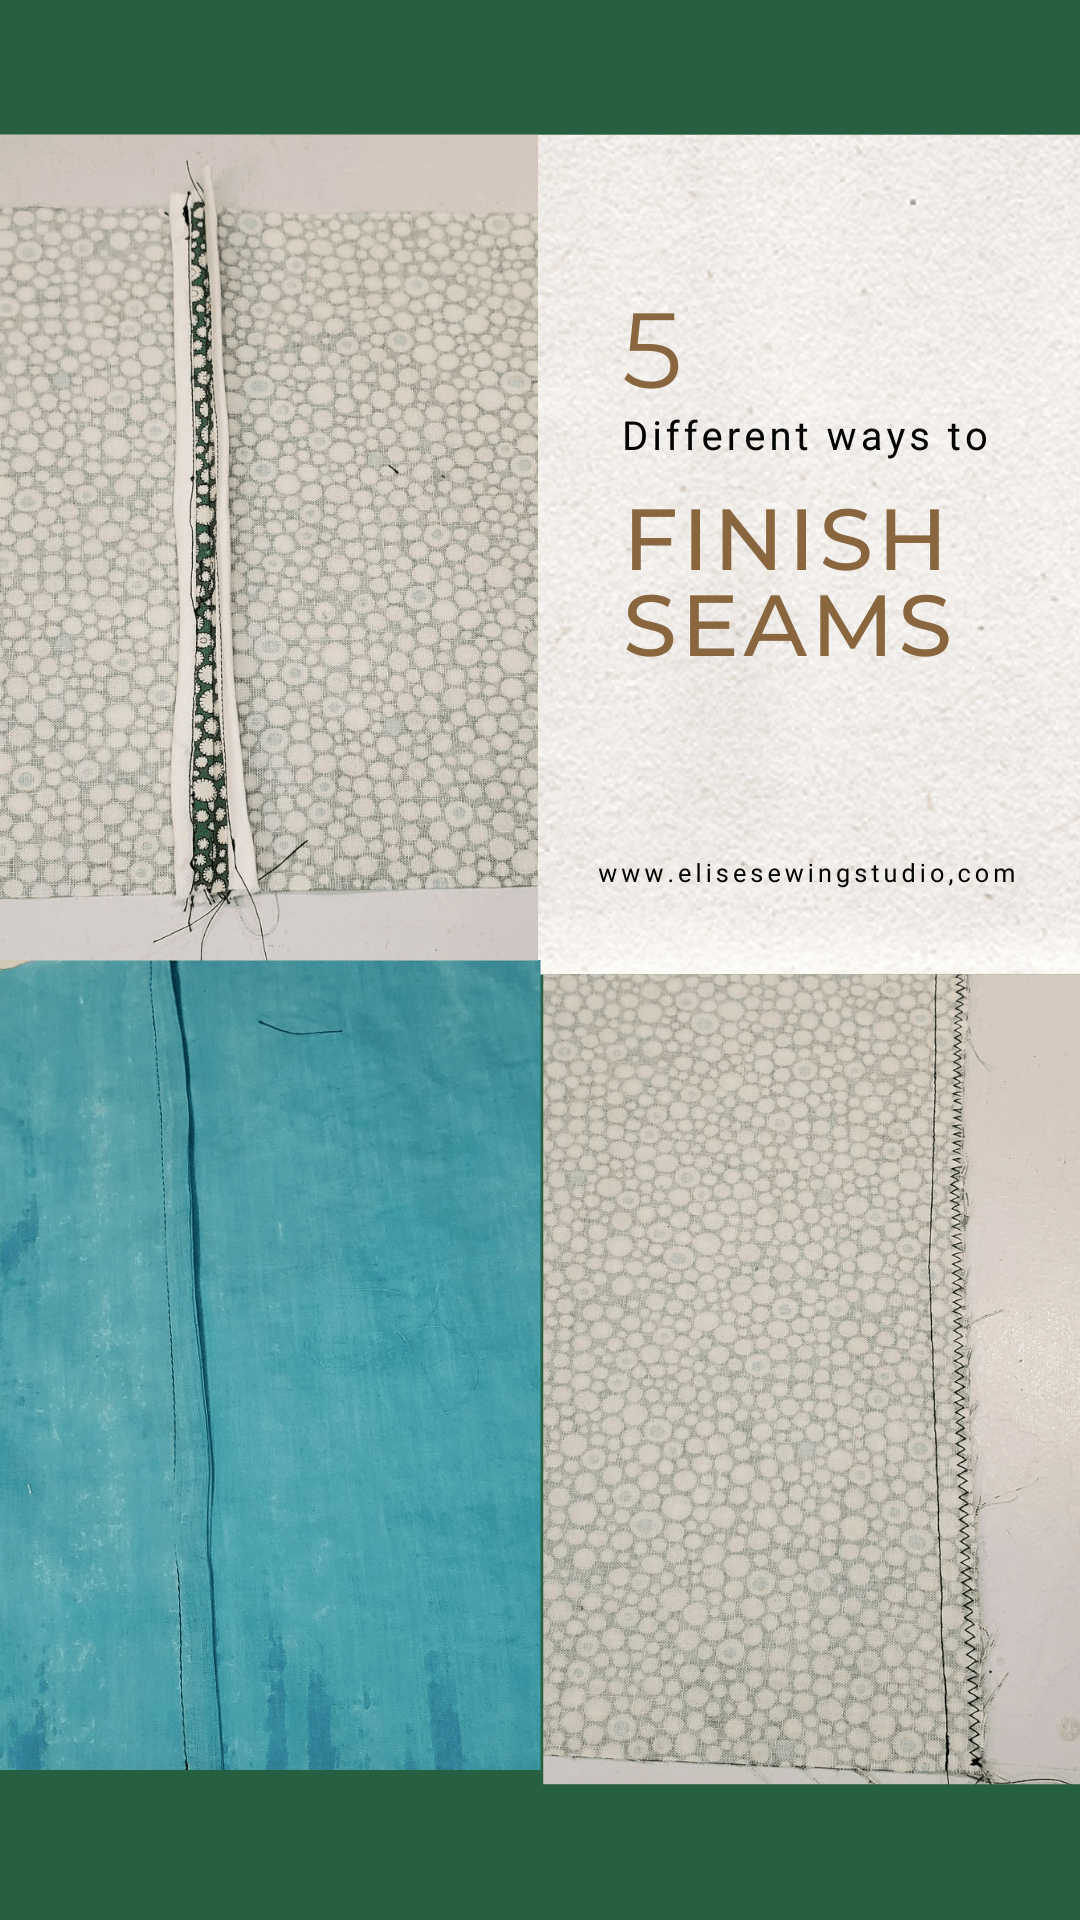 5 different ways to finish seams